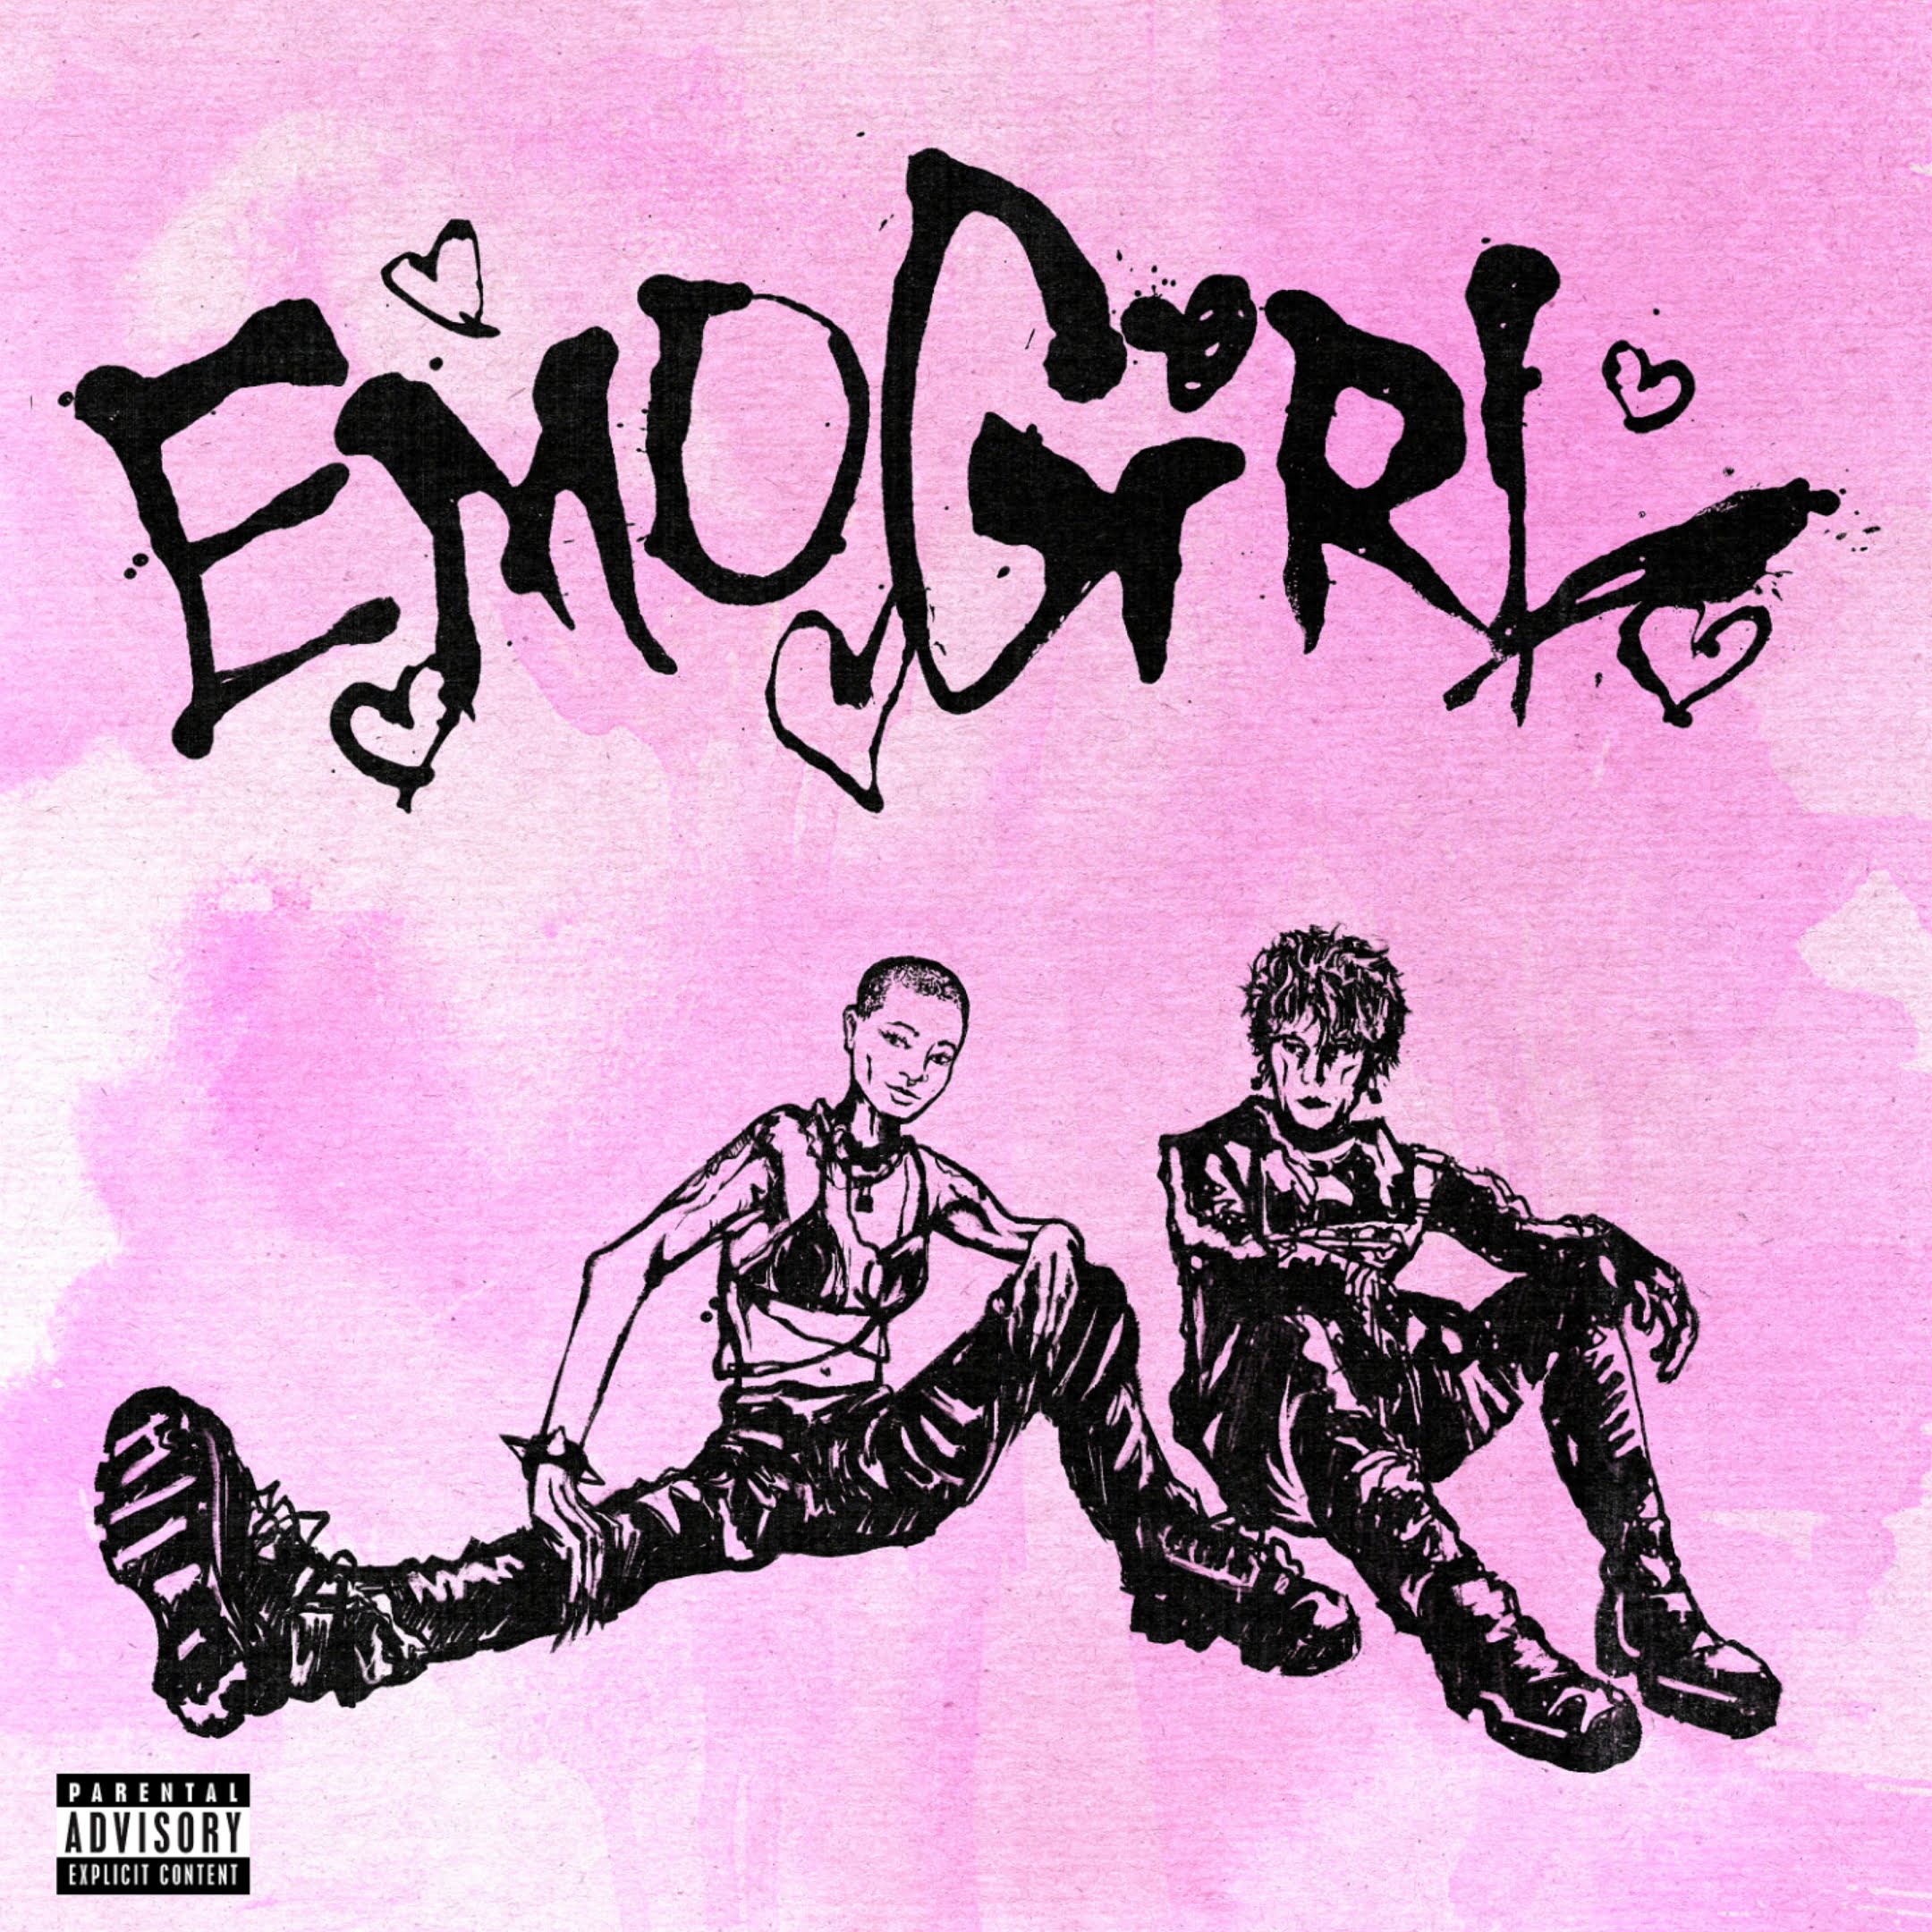 Emogirl via Interscope Records for use by 360 Magazine